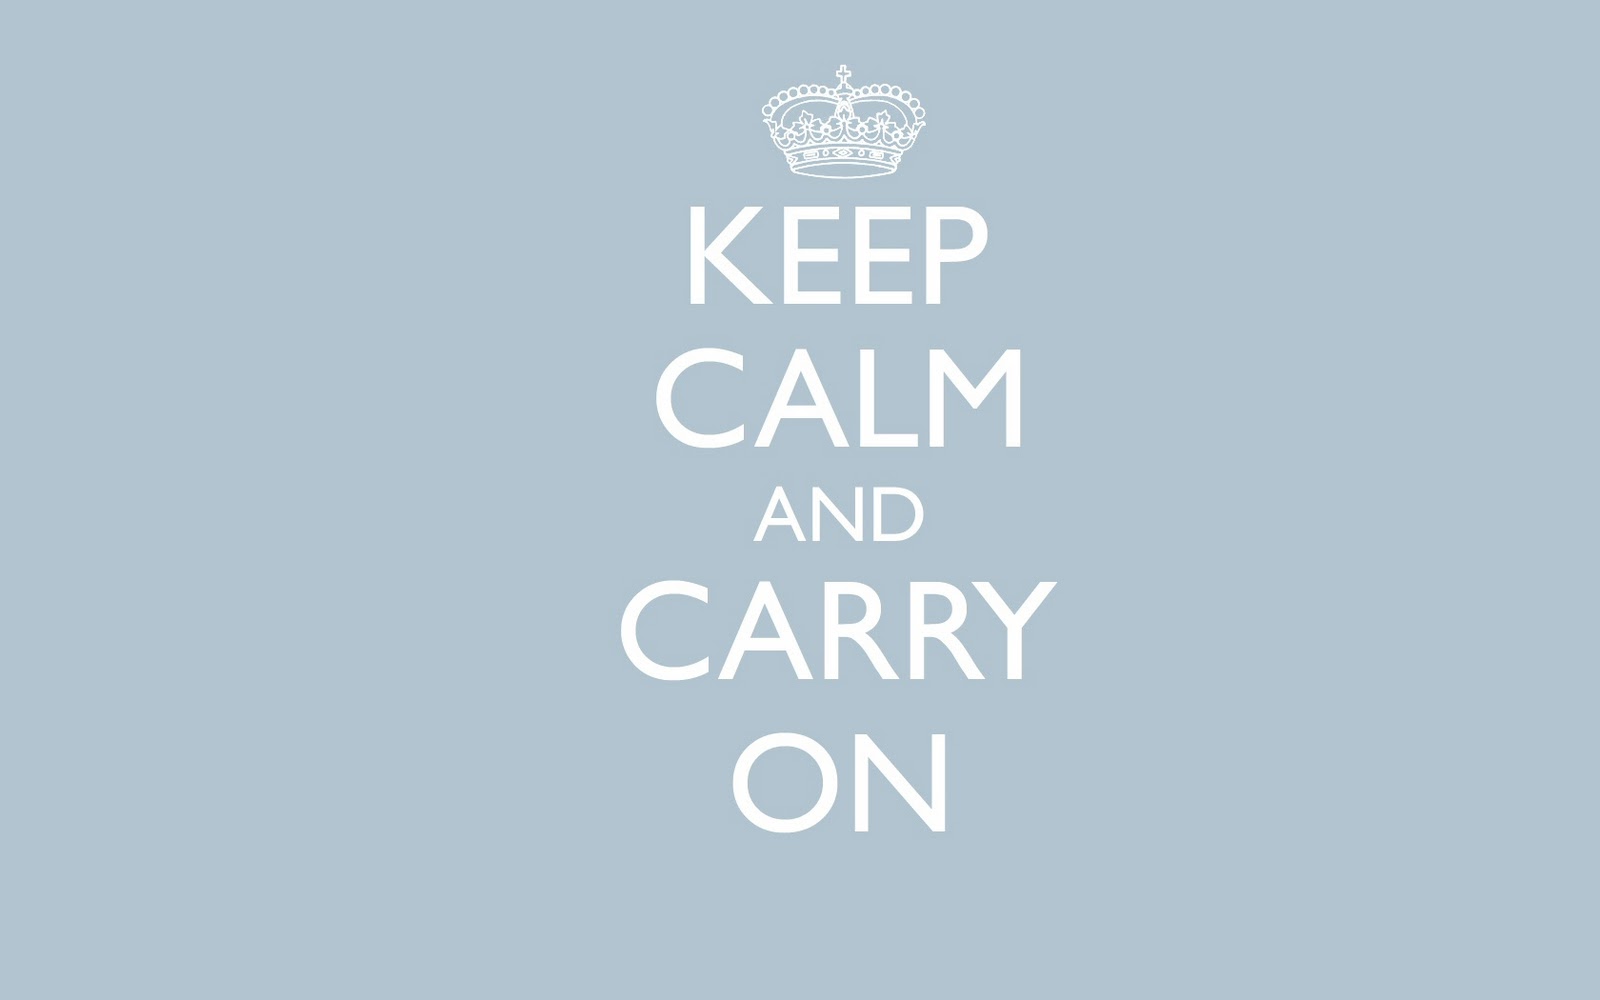 keep calm and carry on wallpaper,font,text,product,logo,sky